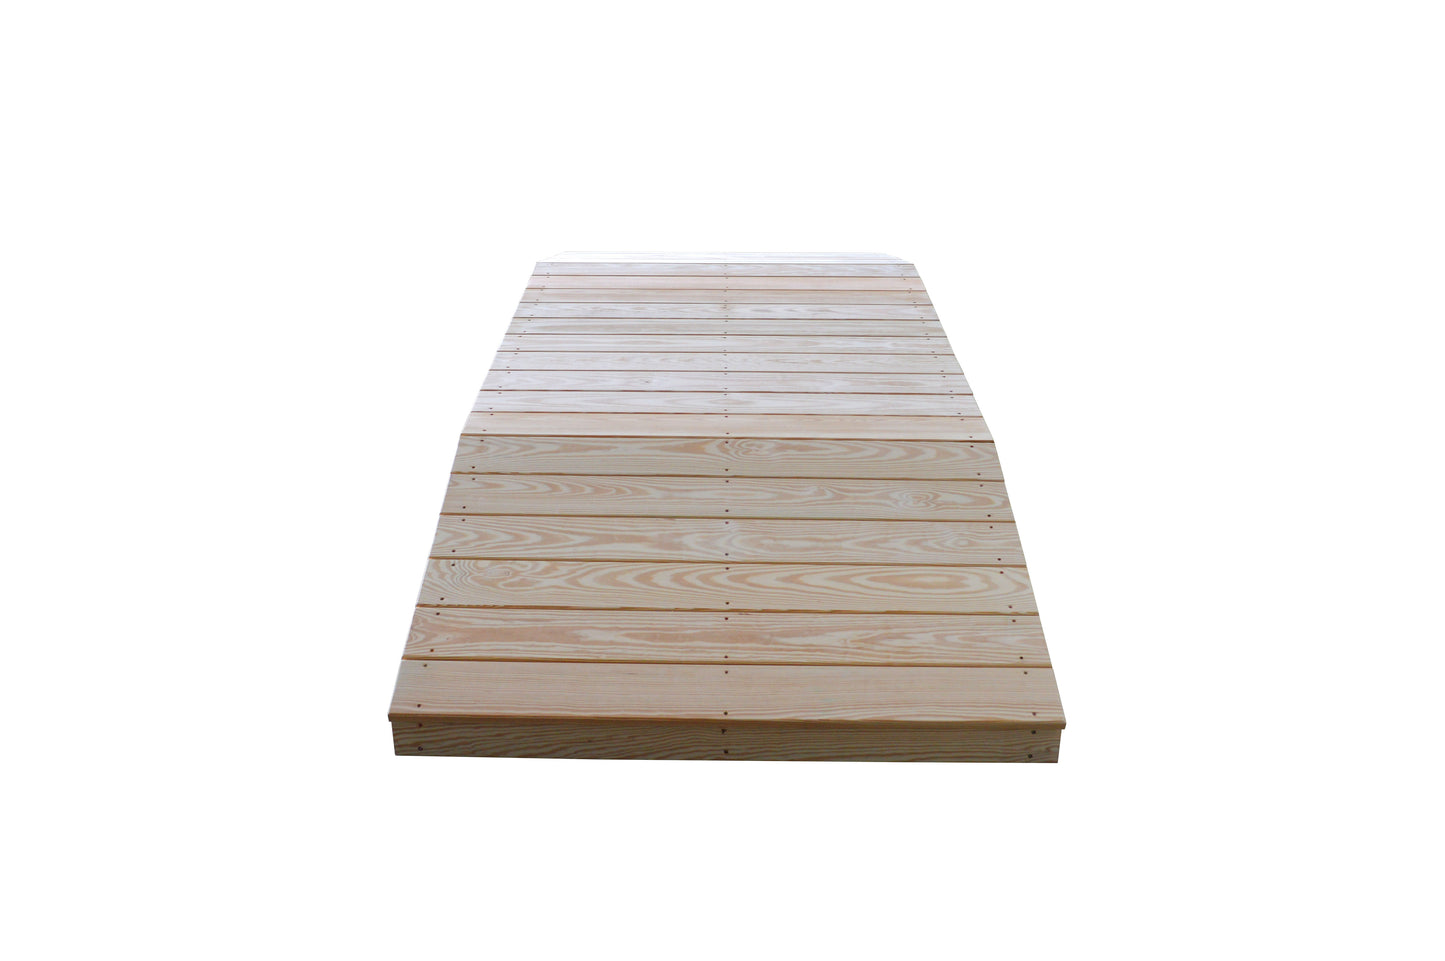 A&L Furniture Pressure Treated Pine 4'  x  10' Standard Plank Bridge - LEAD TIME TO SHIP 10 BUSINESS DAY